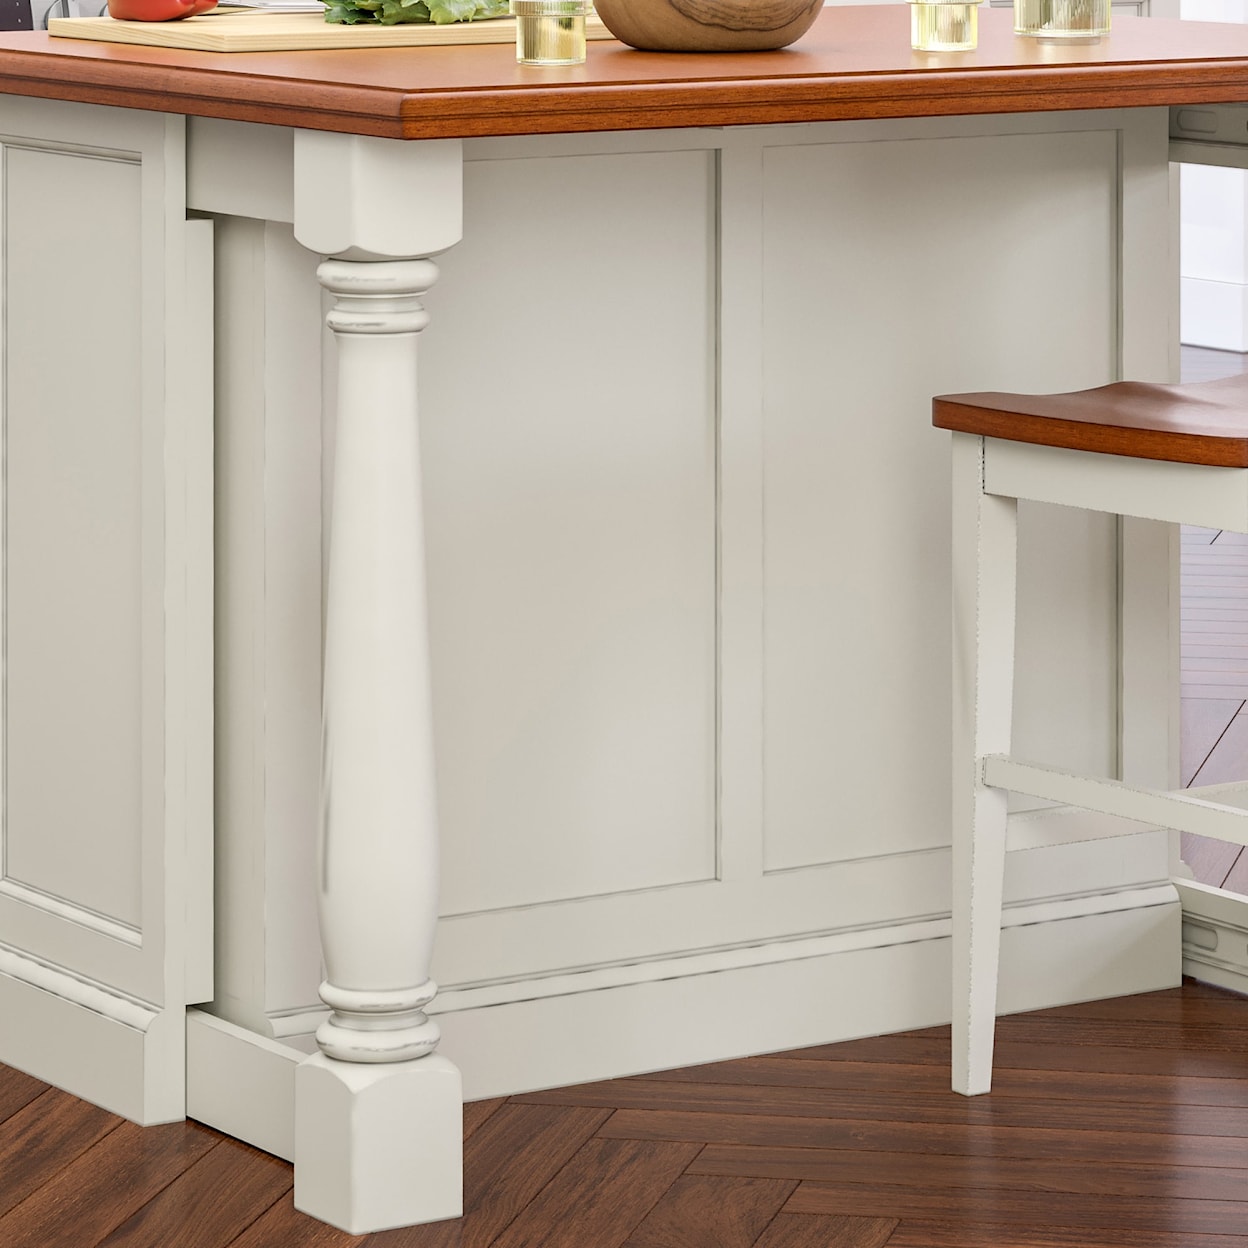 homestyles Monarch Kitchen Island with Wood Top